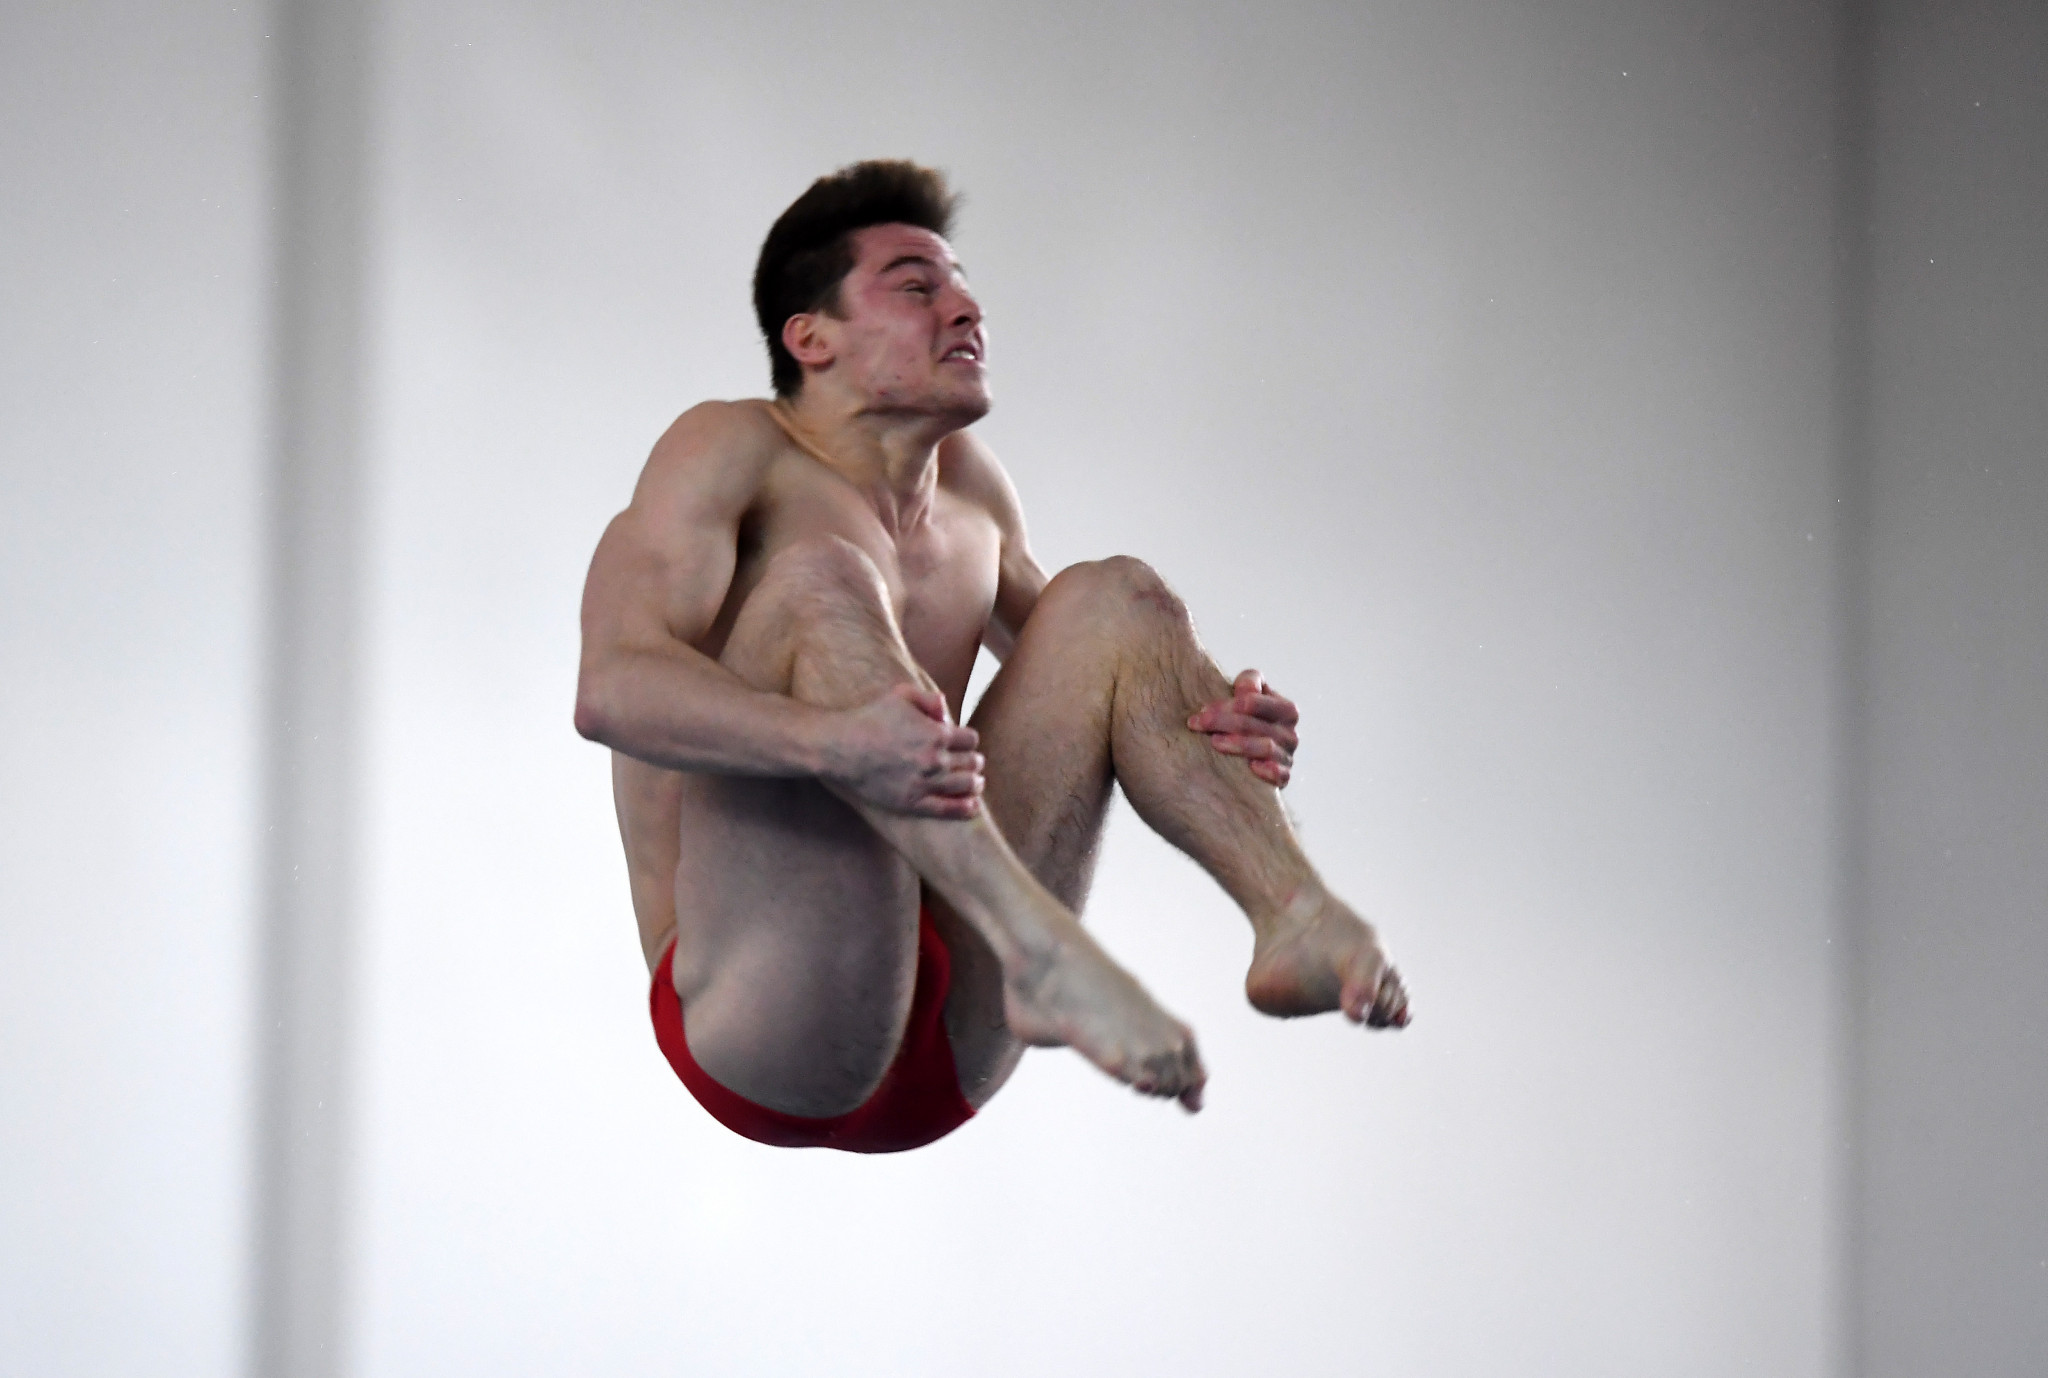 Britain's Harding shines on day one of FINA Diving Grand Prix in Rostock